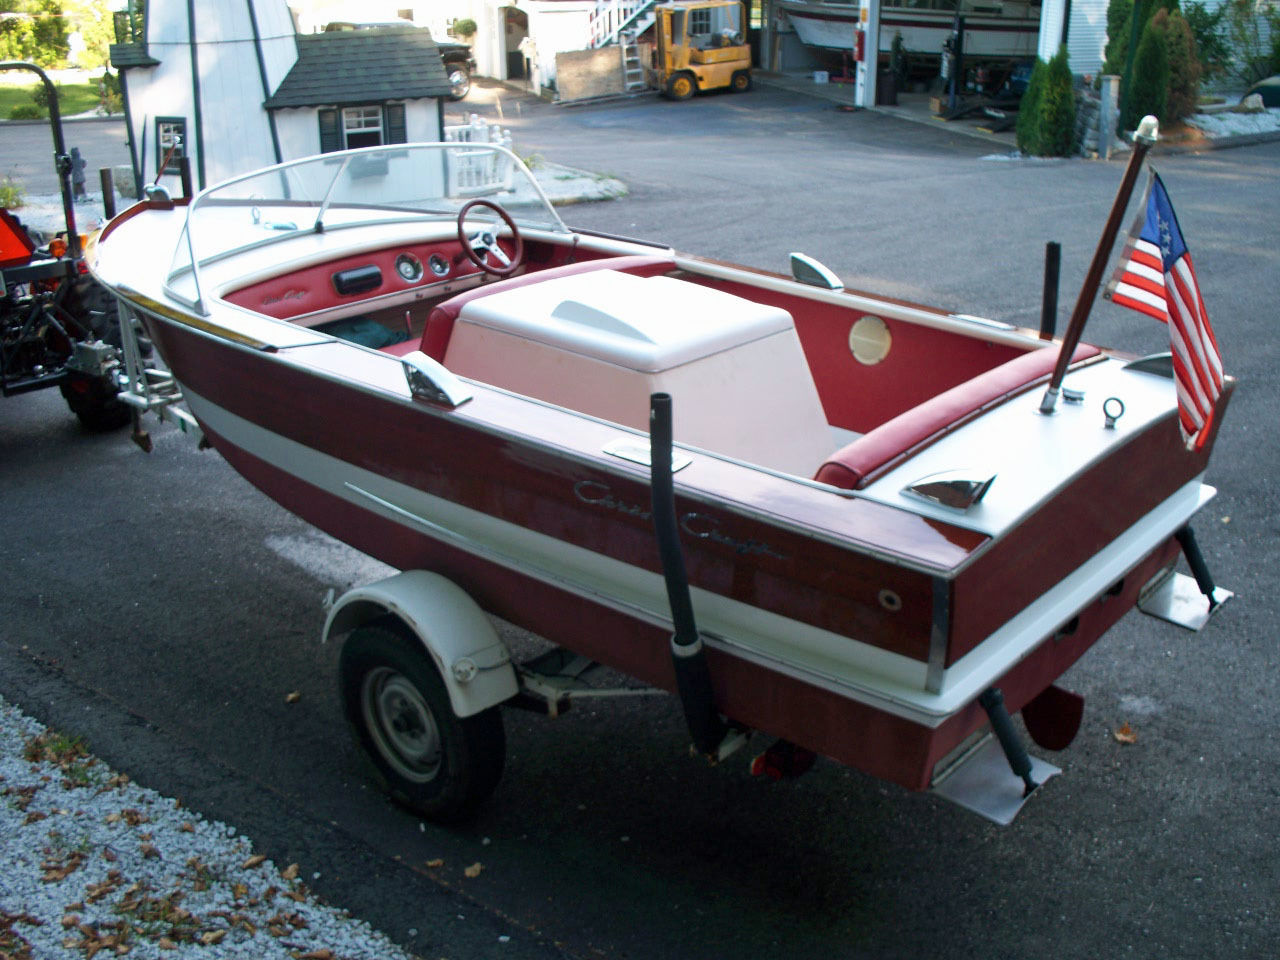 used runabouts for sale near me